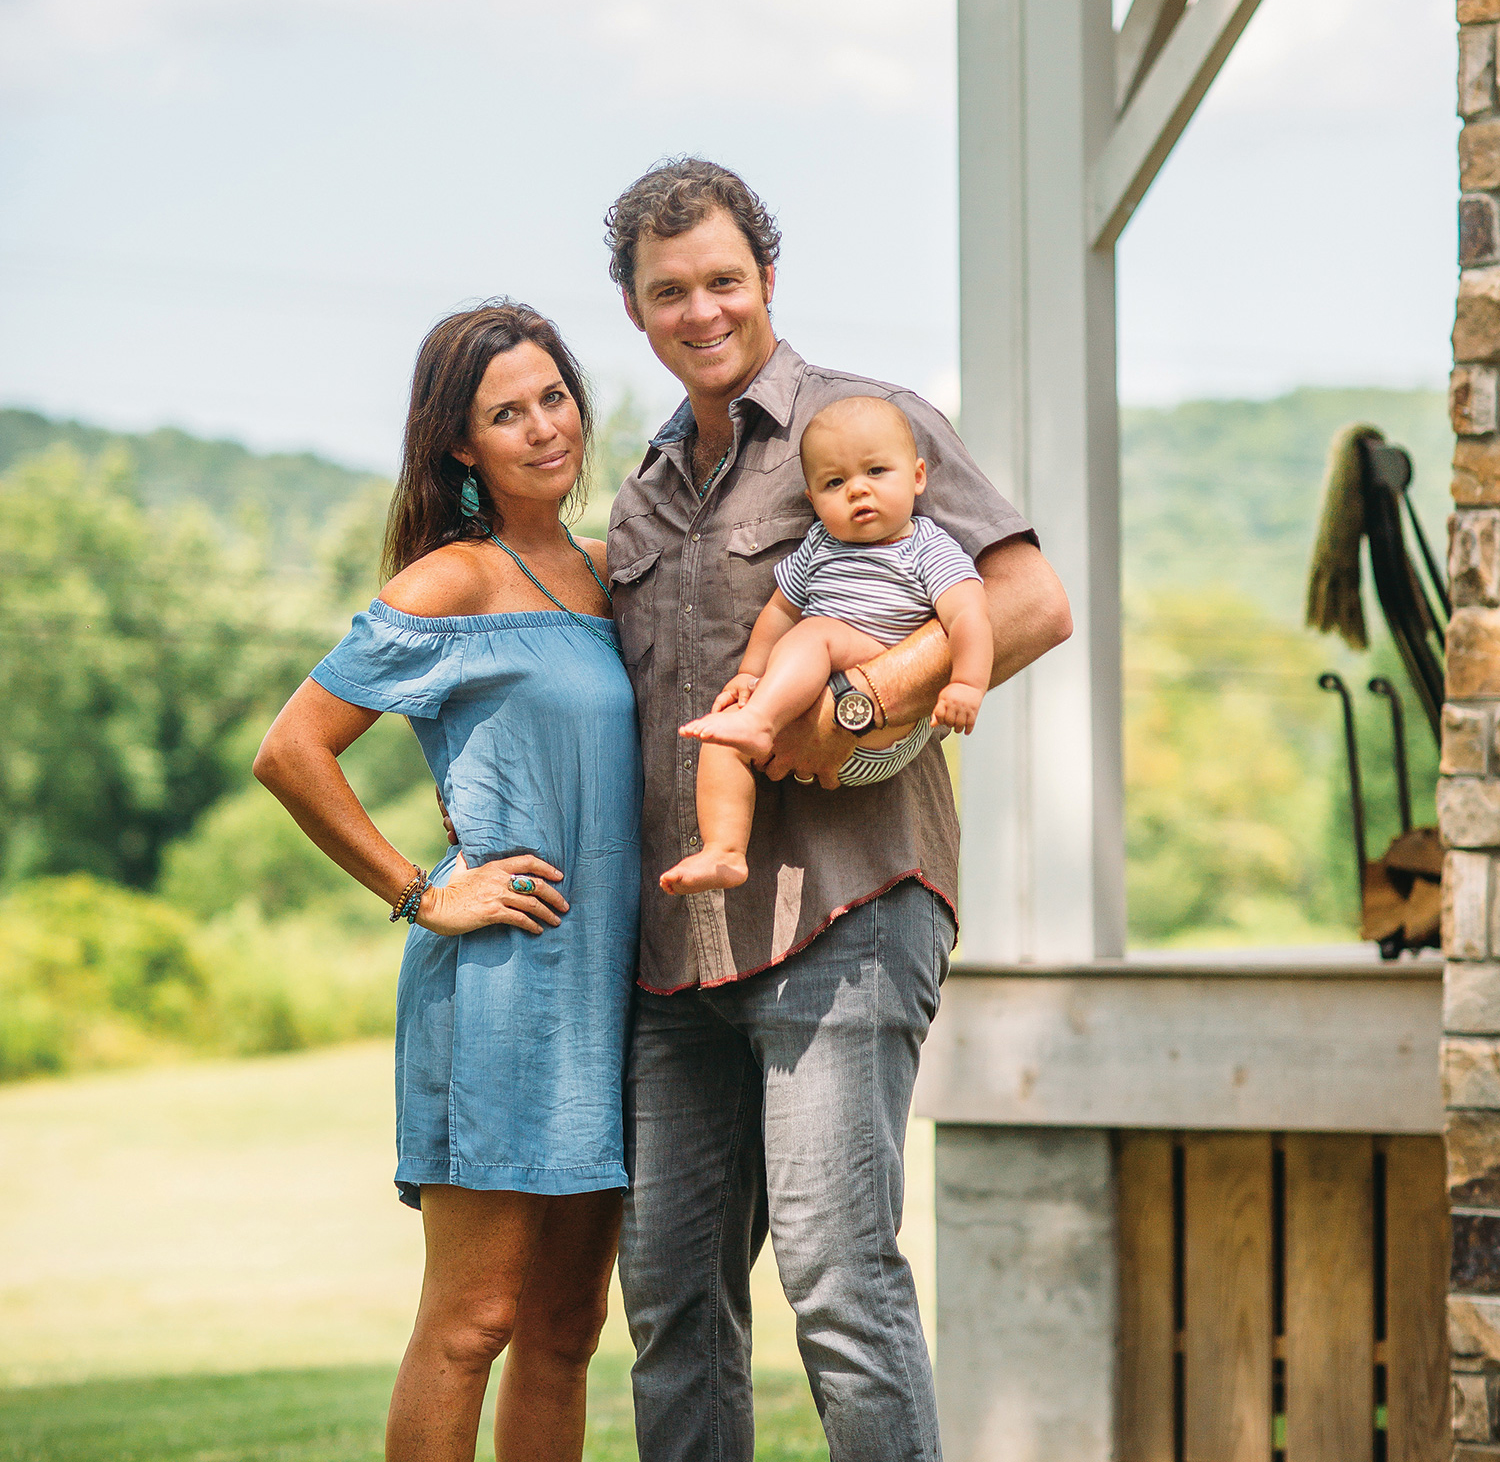 Singer/songwriter/painter Shannon Whitworth and Woody Platt, founding member of the Steep Canyon Rangers and co-producer of the Mountain Song Festival, enjoy a well-tuned Americana lifestyle in rural Brevard with their baby son Rivers. Photo by Tim Robison